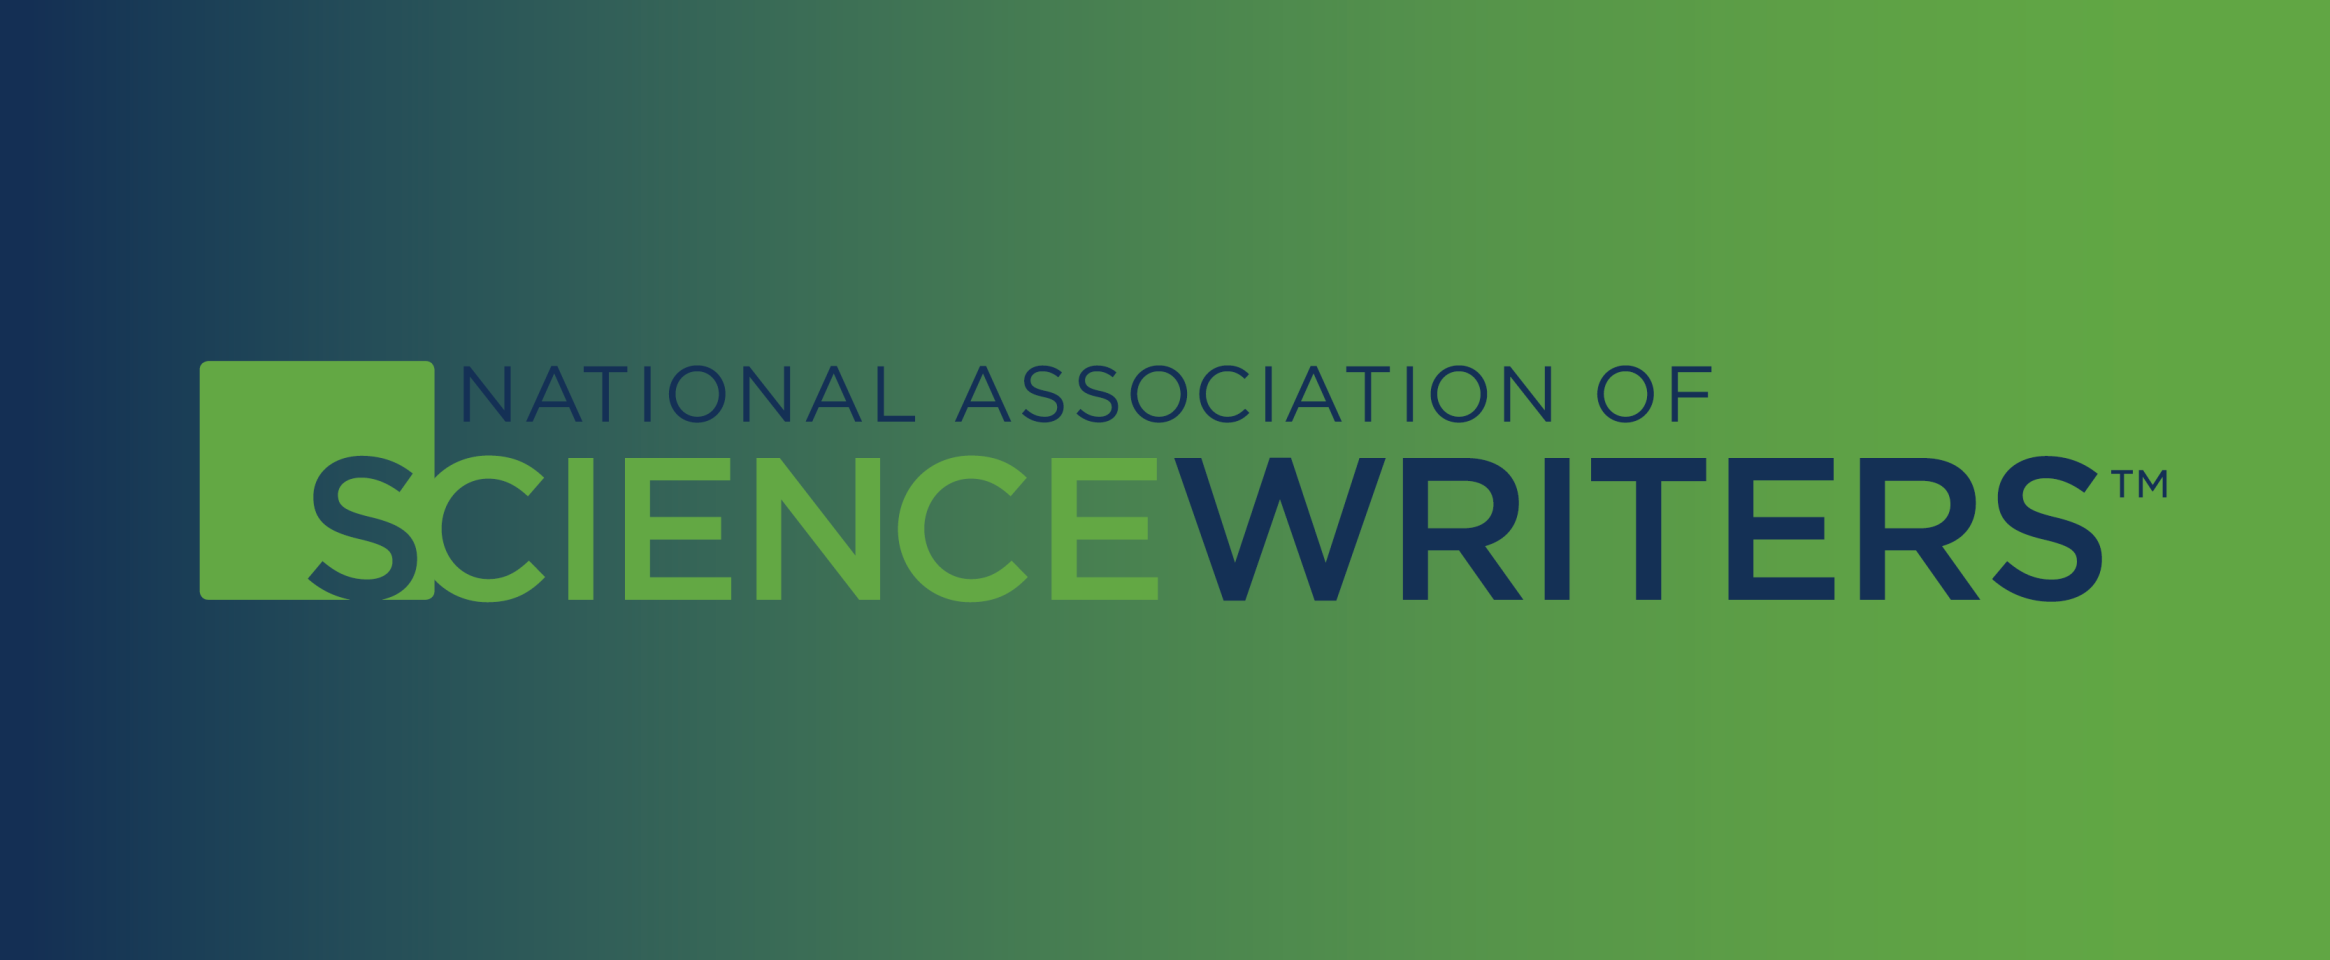 The logomark of the National Association of Science Writers. The "S" is encased in a square shape, emulating a Periodic Table of Elements square.